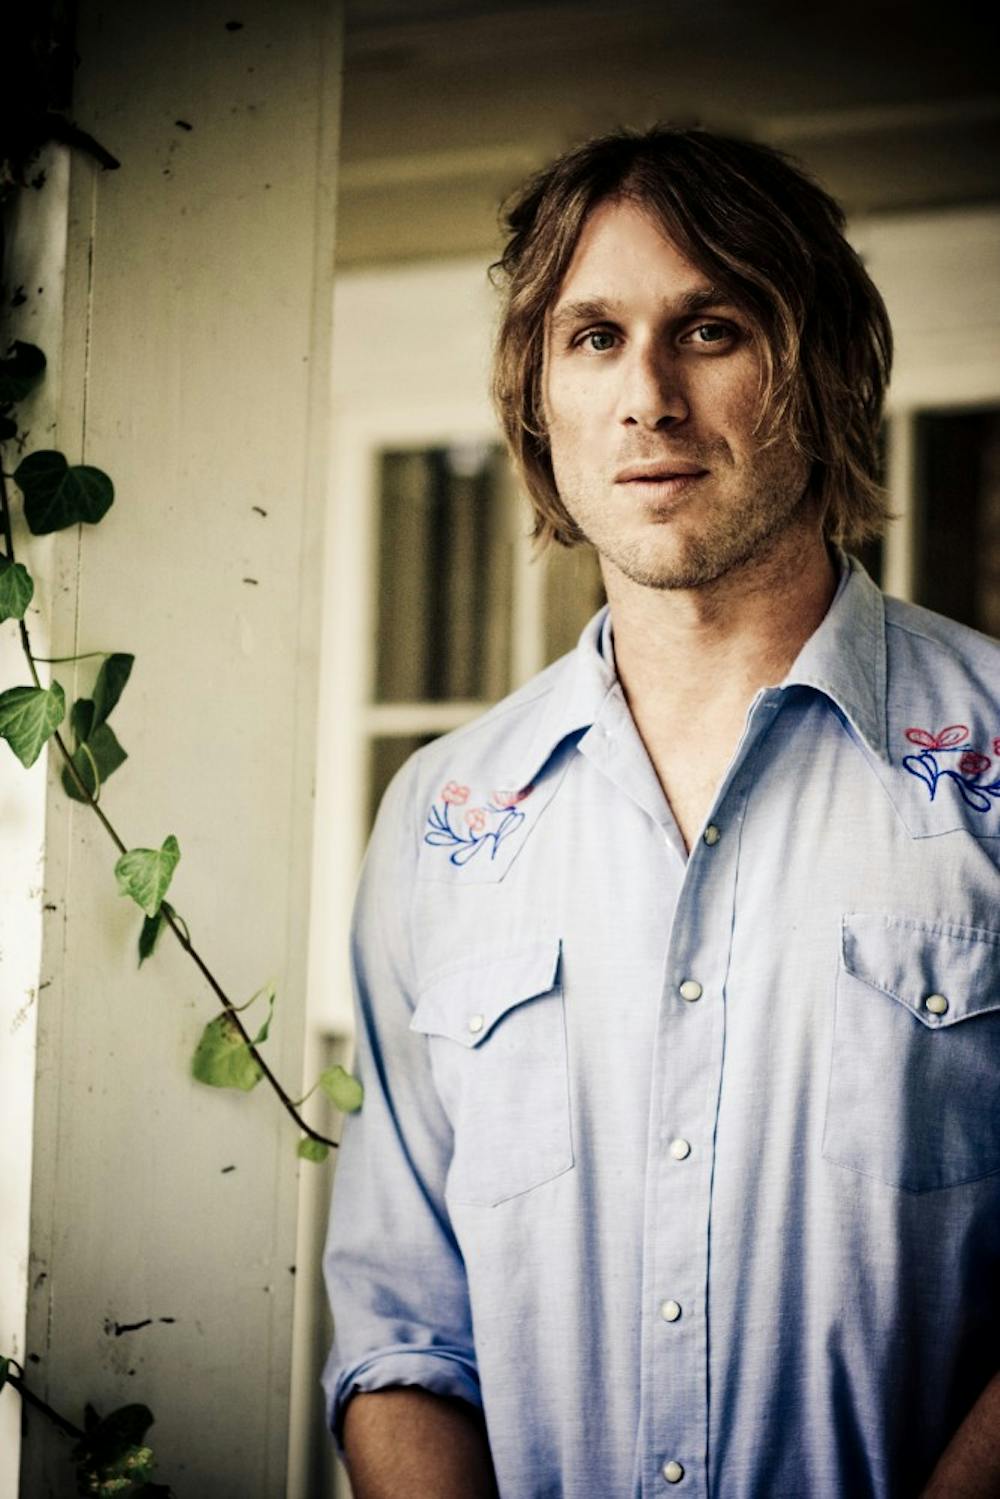 Todd Snider emerged onto the music scene in the ‘90s, fusing pop, country and Americana. Courtesy of Todd Purifoy